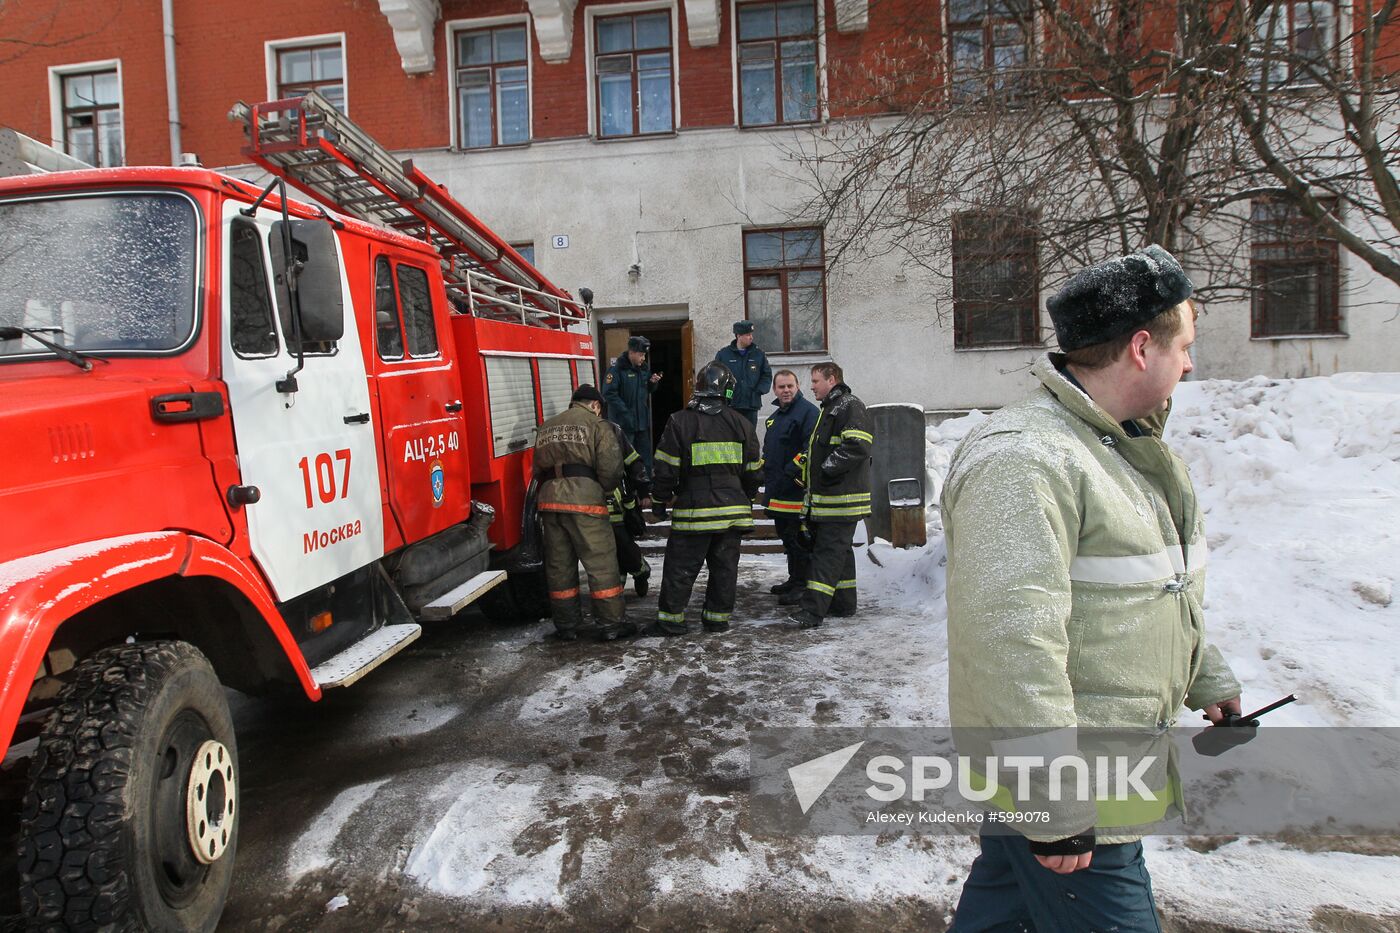 Fire engine at fire-struck dormitory